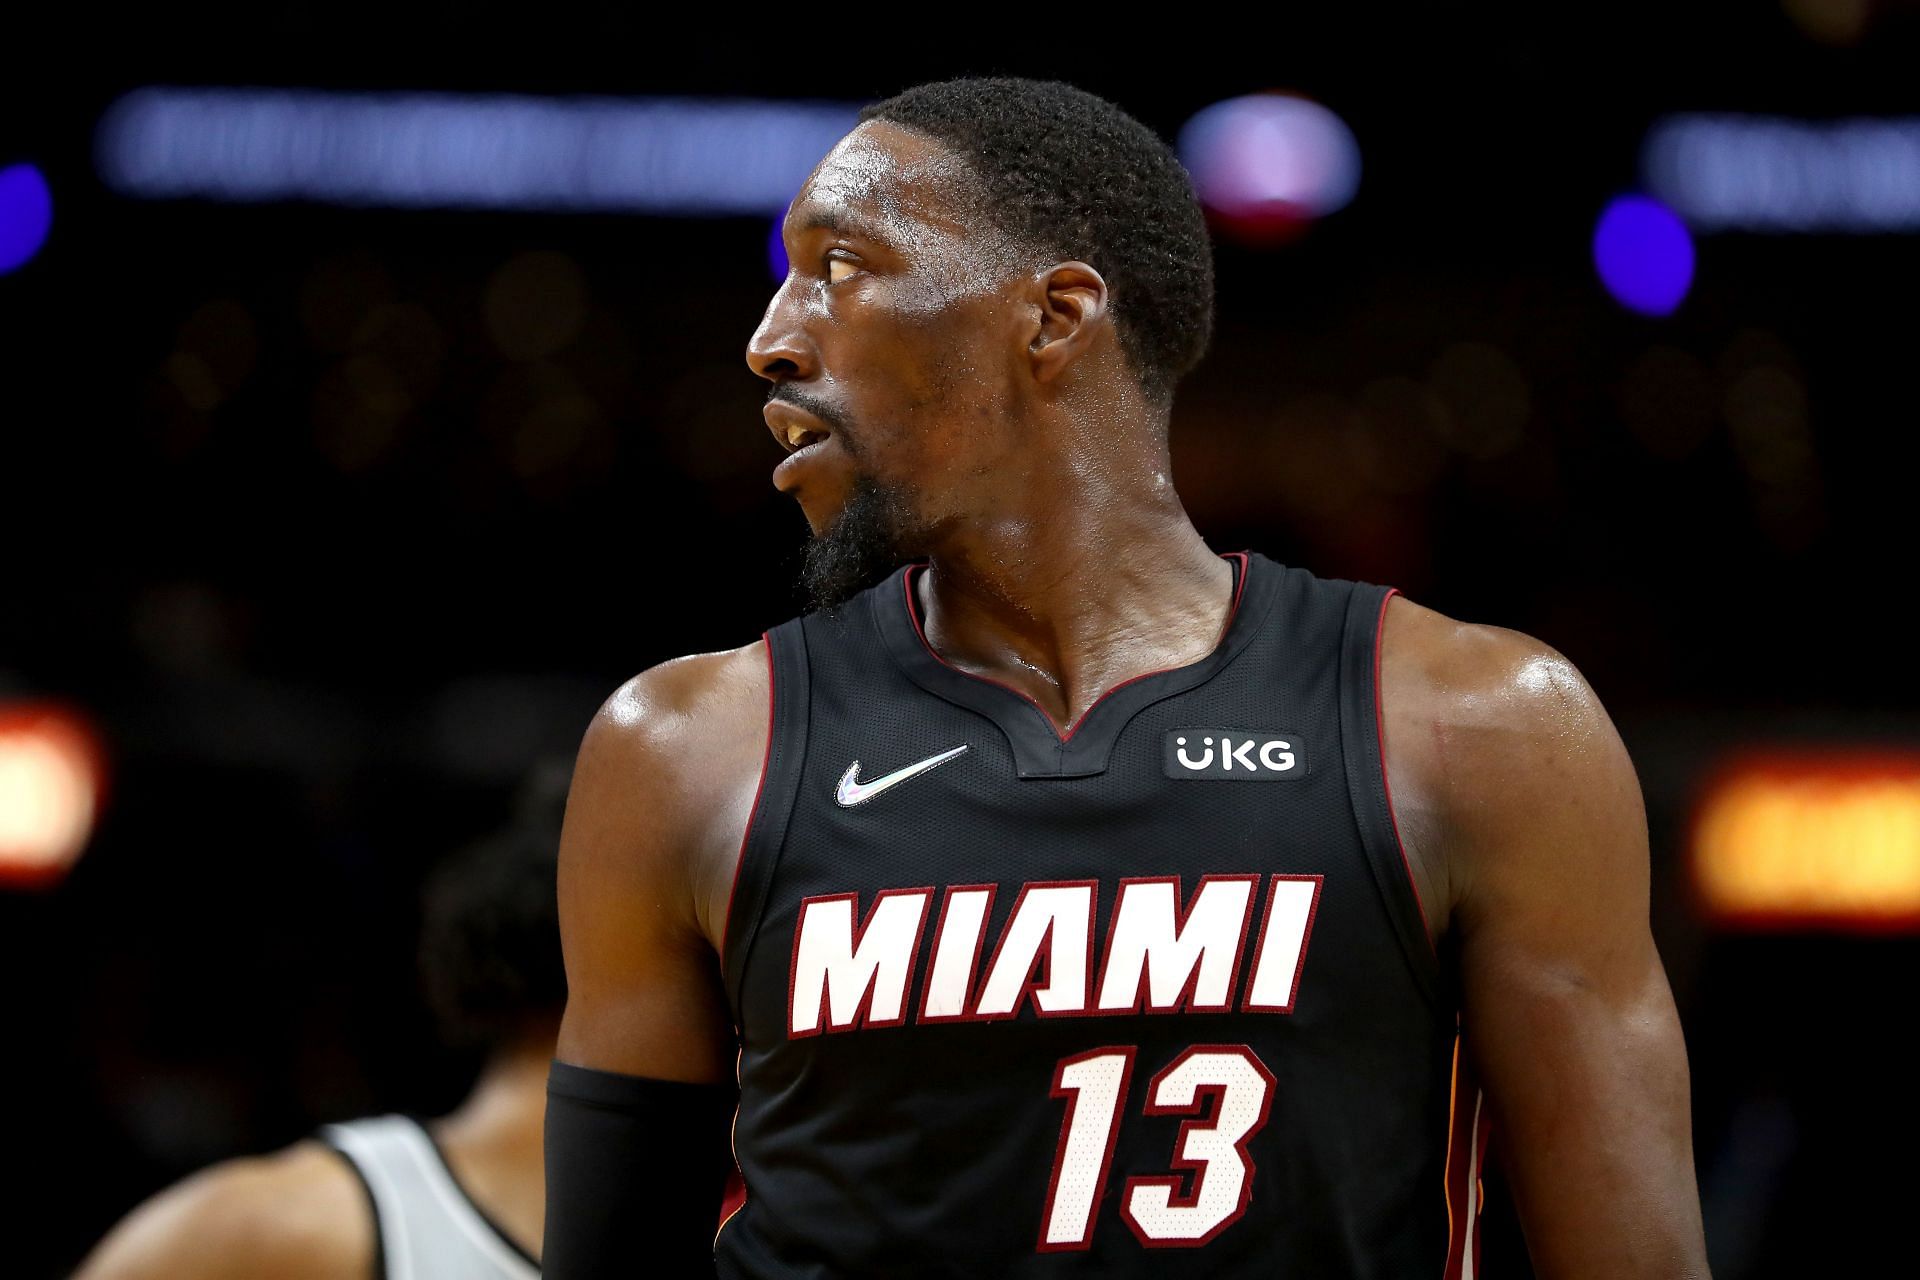 Bam Adebayo #13 of the Miami Heat looks on against the San Antonio Spurs during their game at FTX Arena on February 26, 2022 in Miami, Florida.